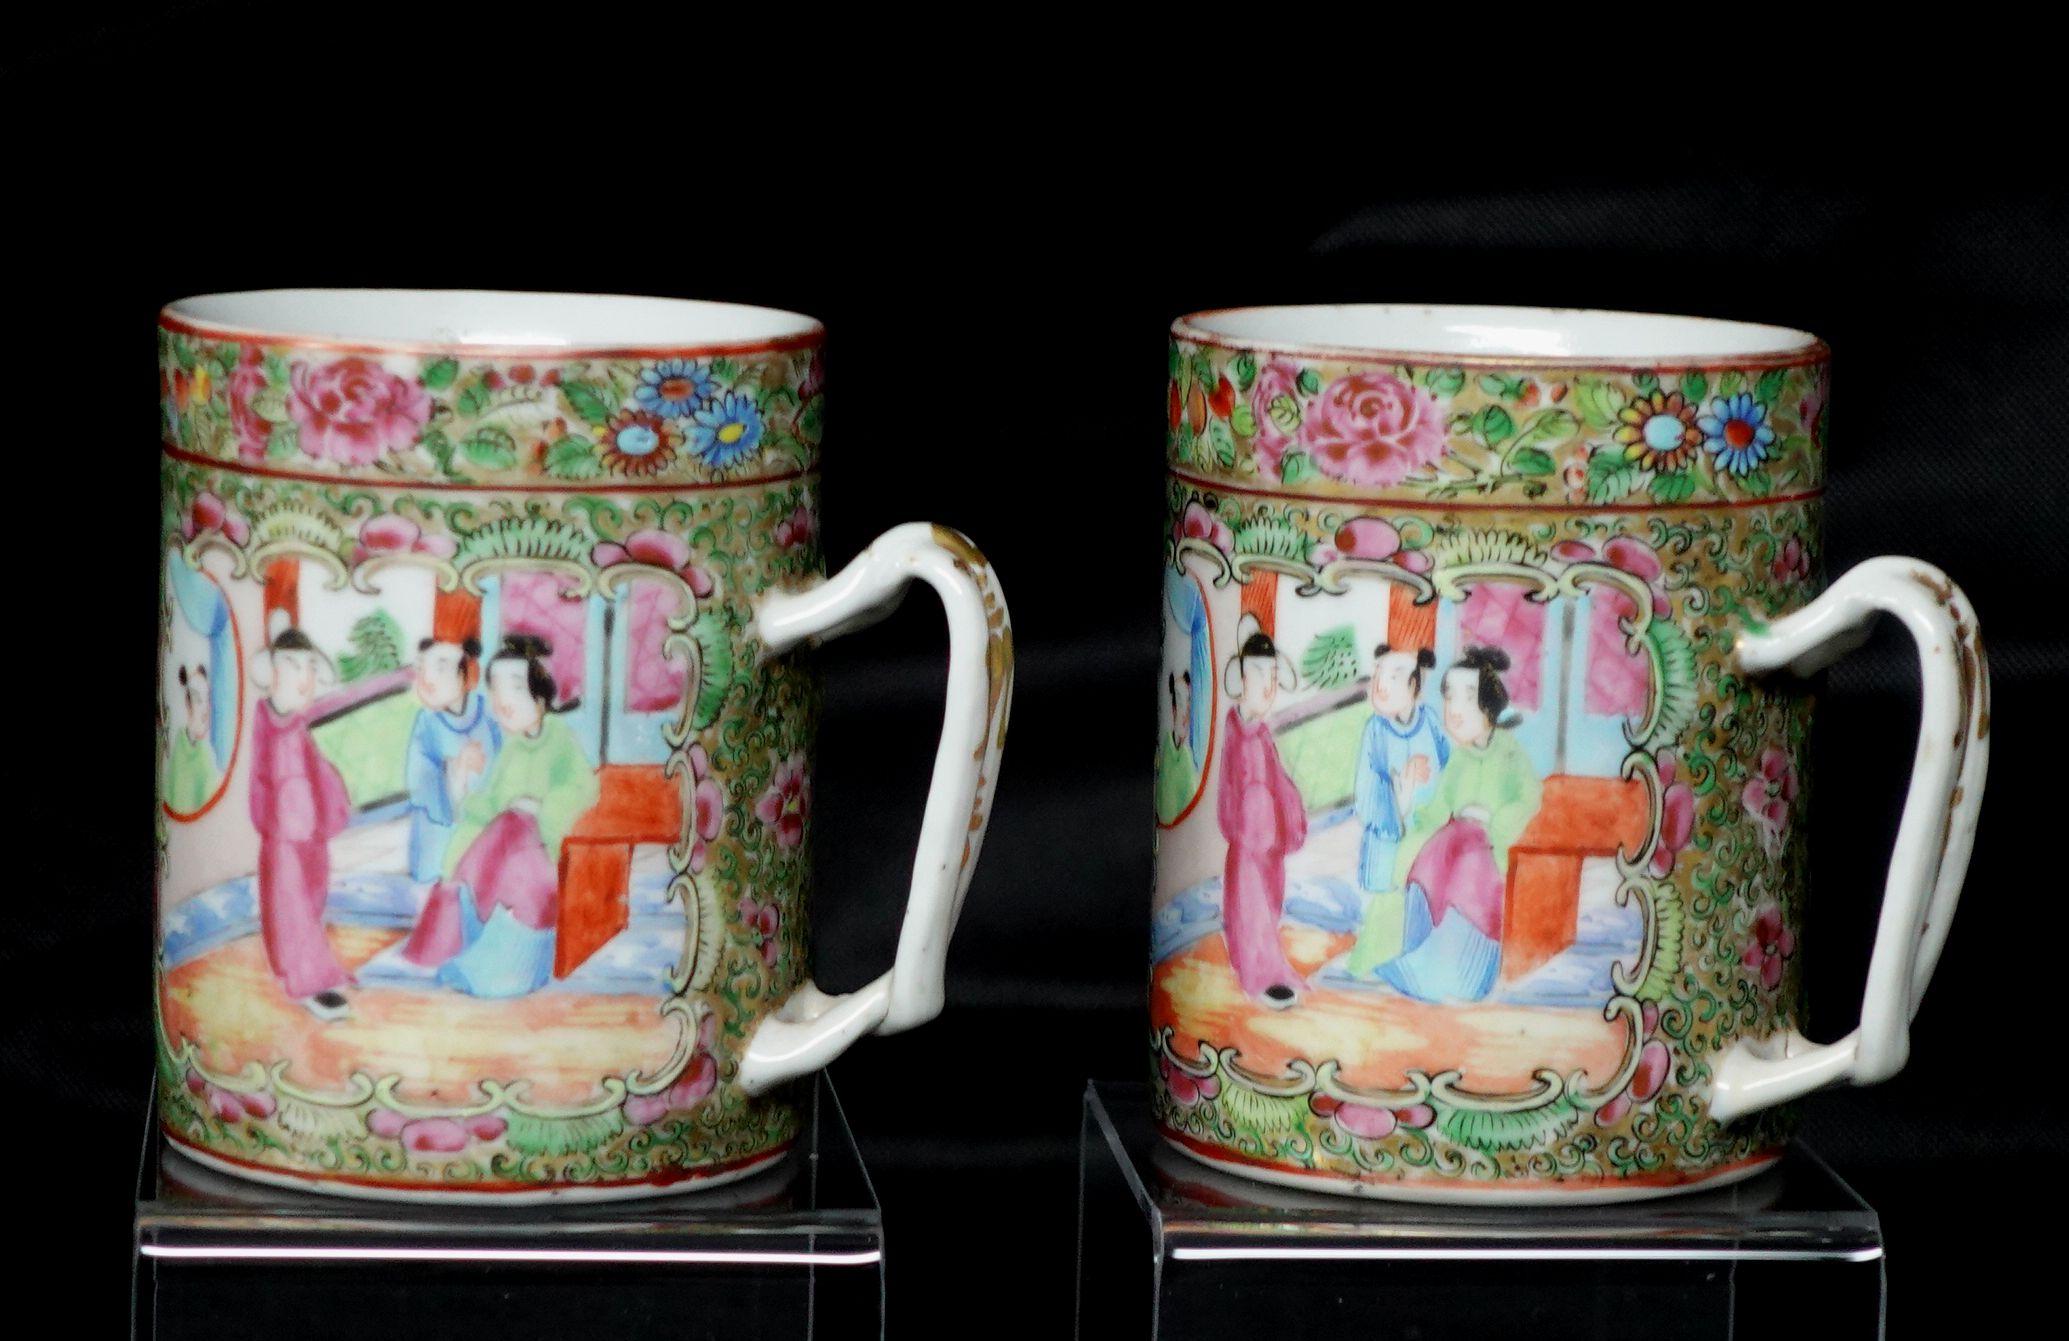 Rare early pair of Rose Medallion Export porcelain mugs, China, 19th century.
 